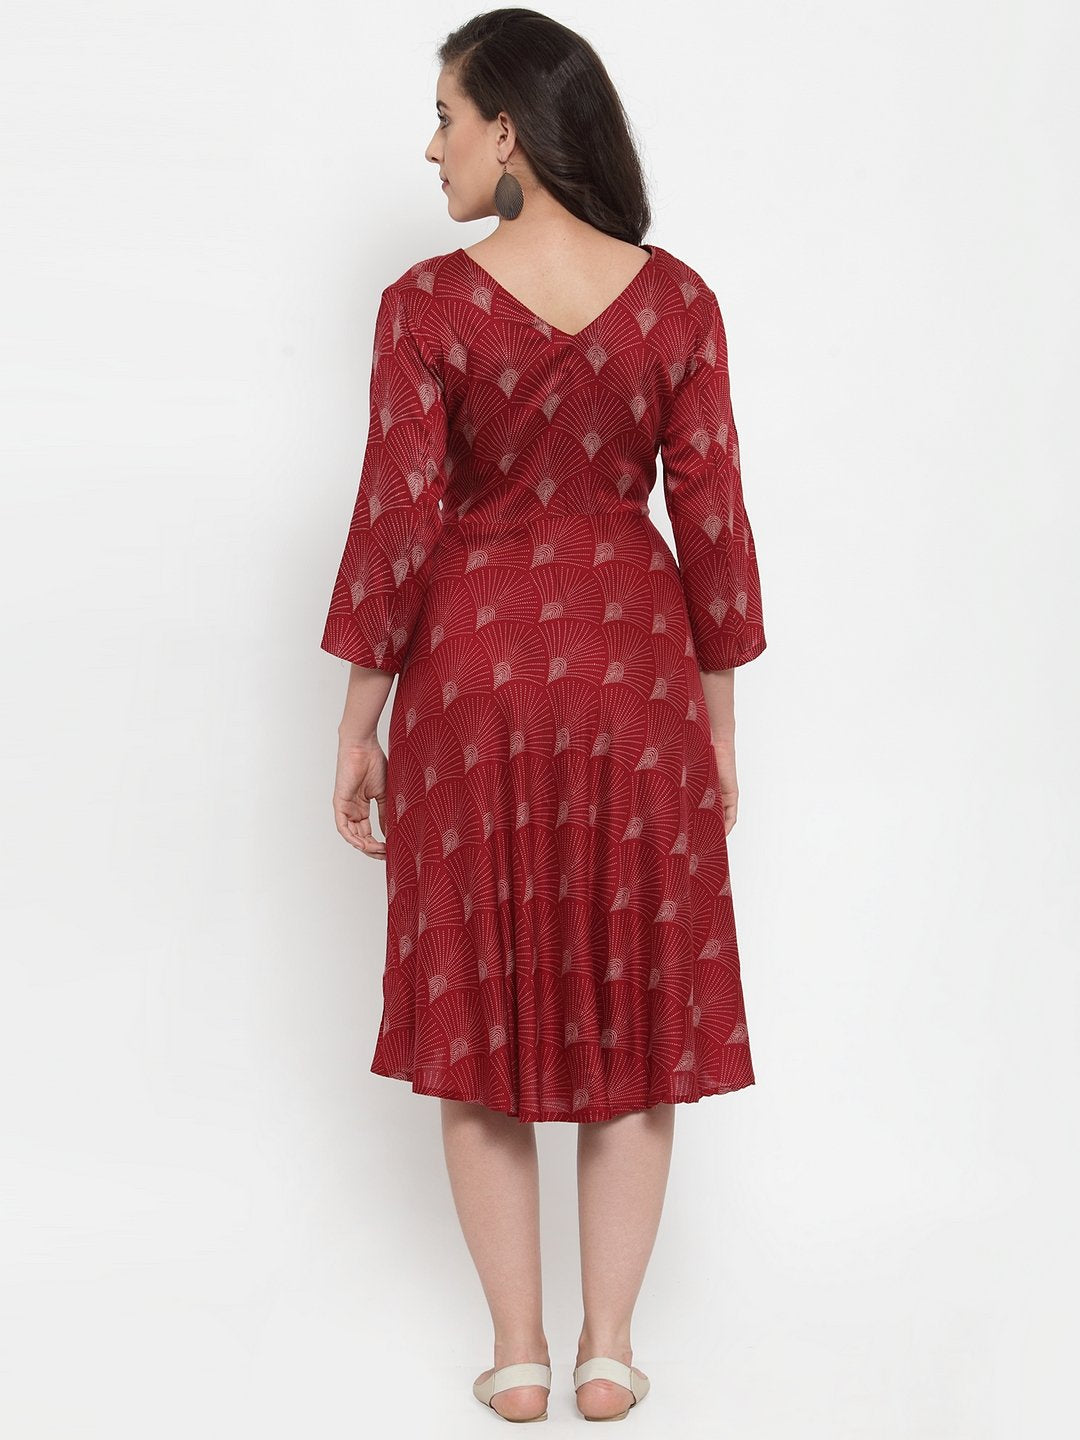 Women's Maroon Printed Fit and Flare Ethnic Dress - Jompers